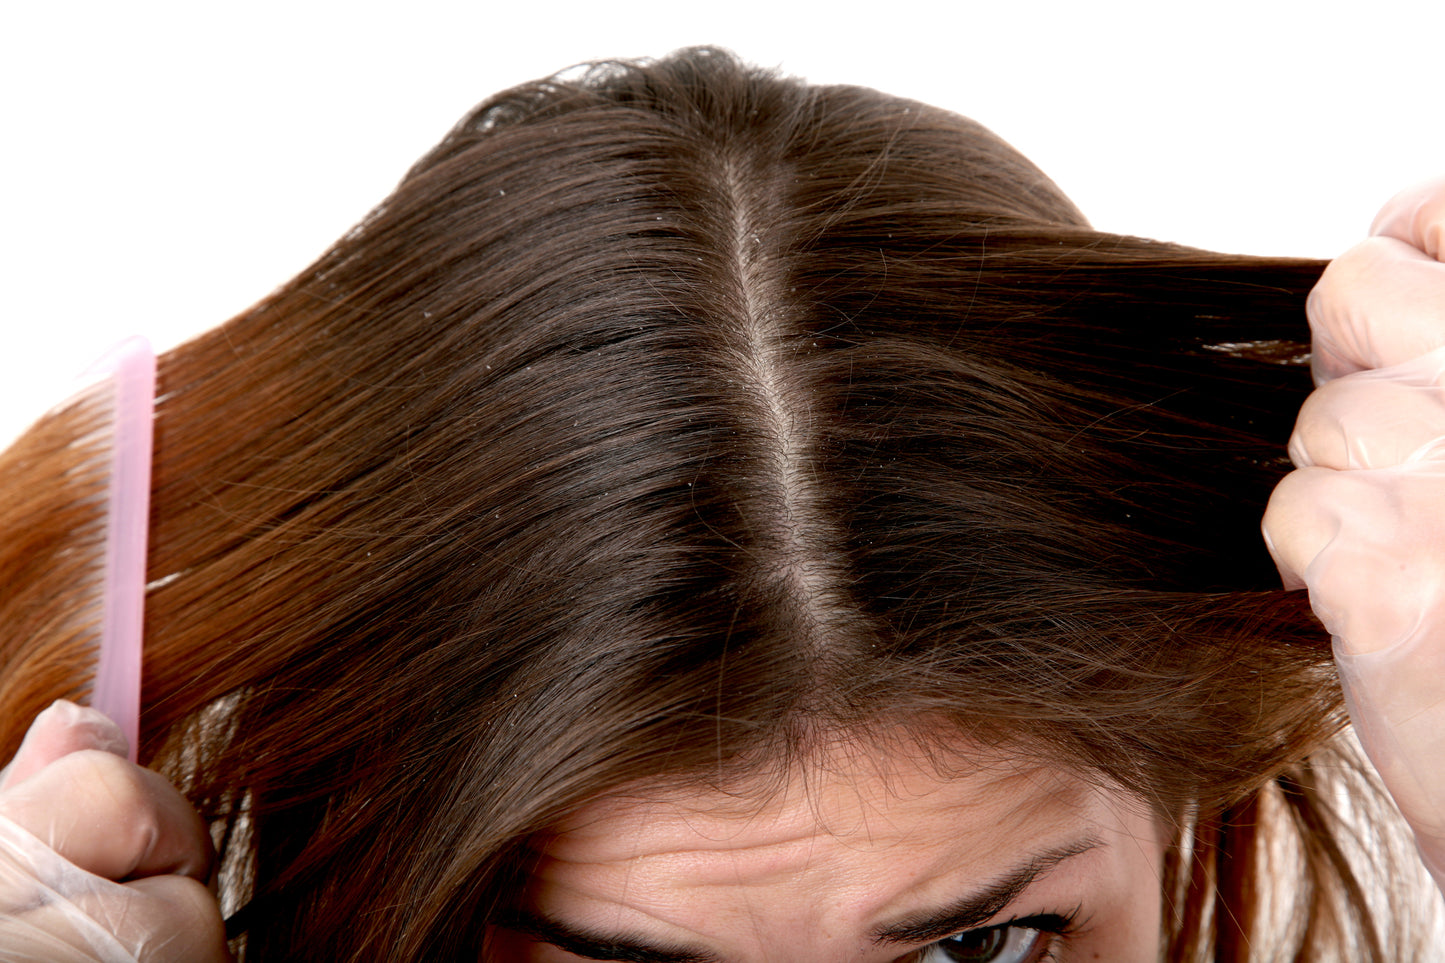 6 Stress Factors That May Be Causing Your Hair Loss or Thinning Hair